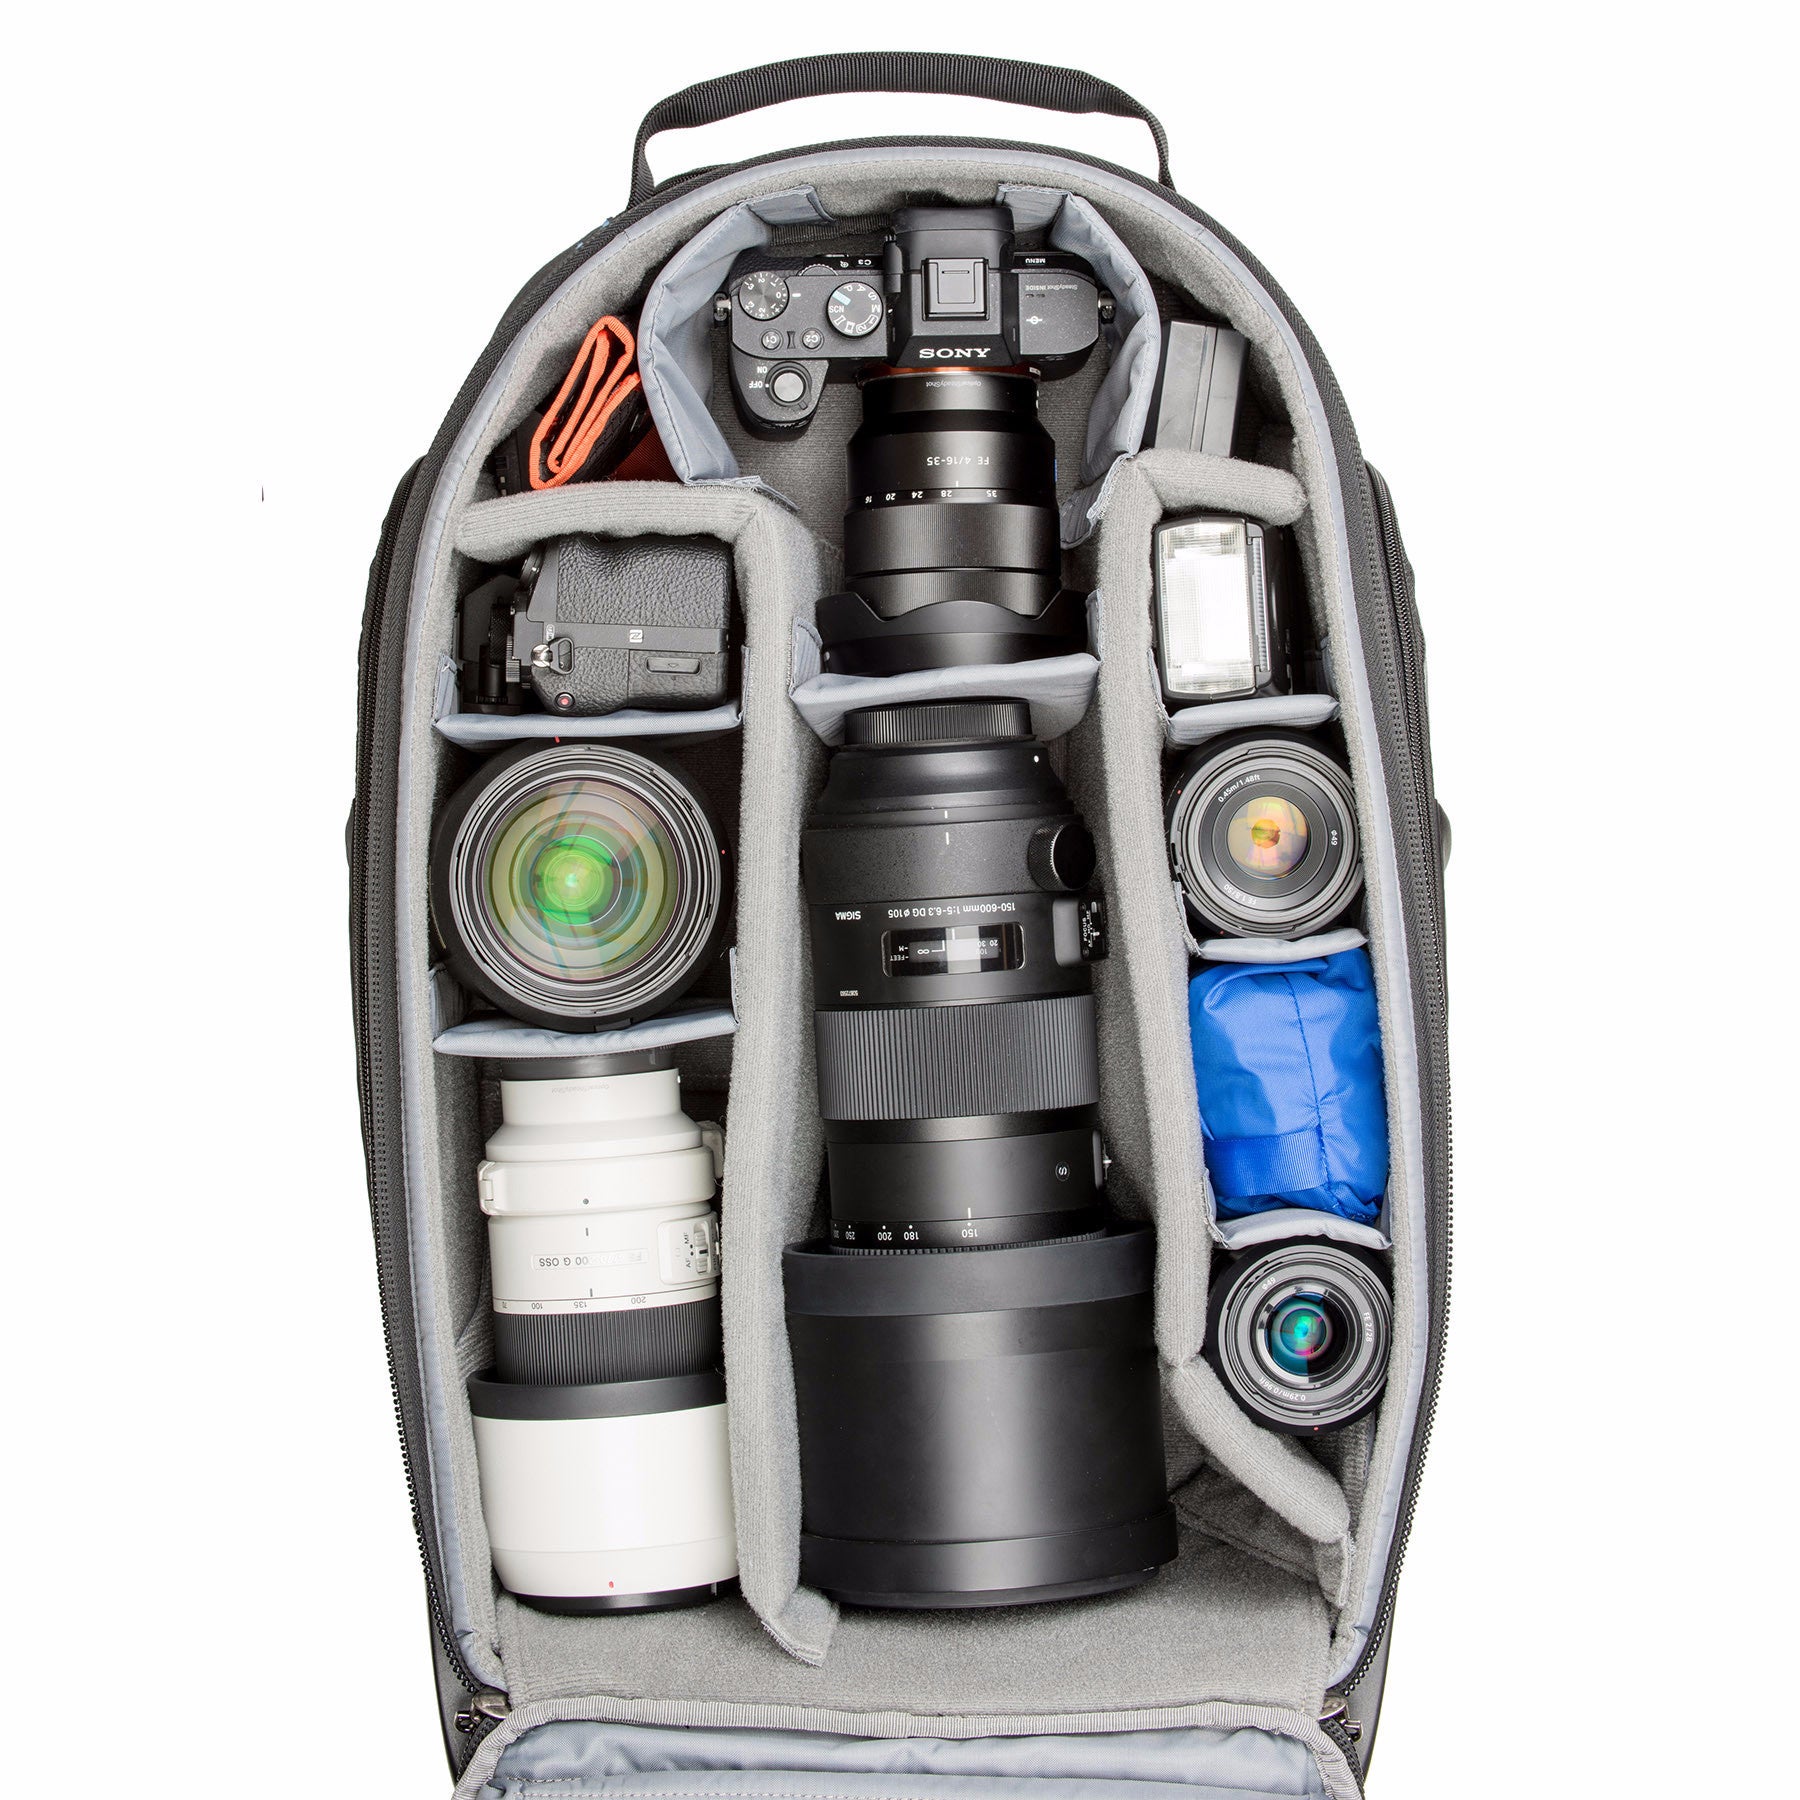 Adjustable dividers allow a customized fit for your DSLR or Mirrorless gear